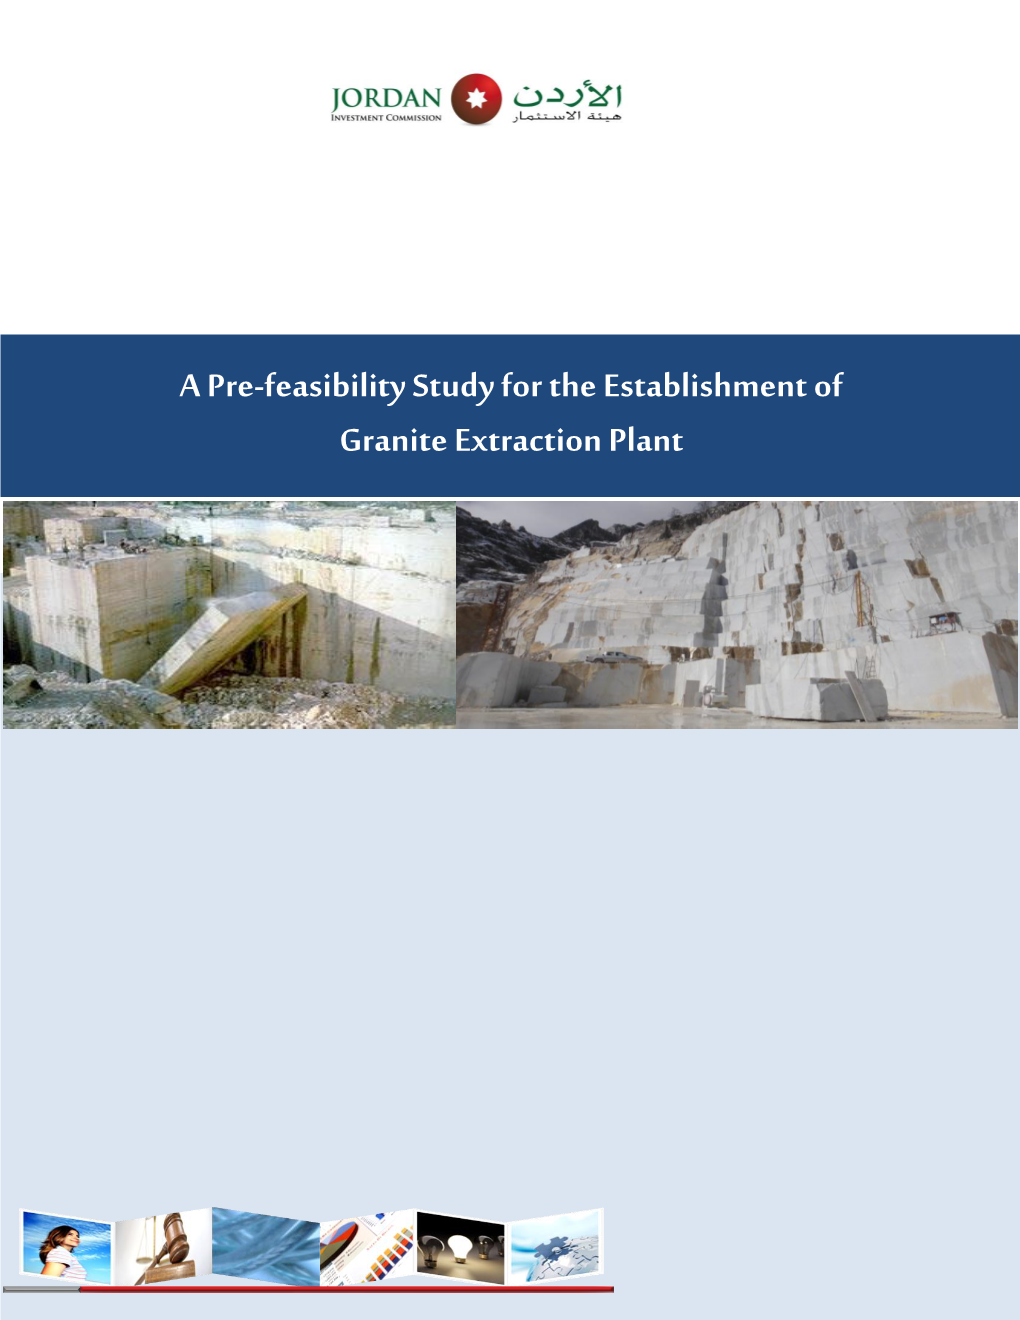 A Pre-Feasibility Study for the Establishment of Granite Extraction Plant